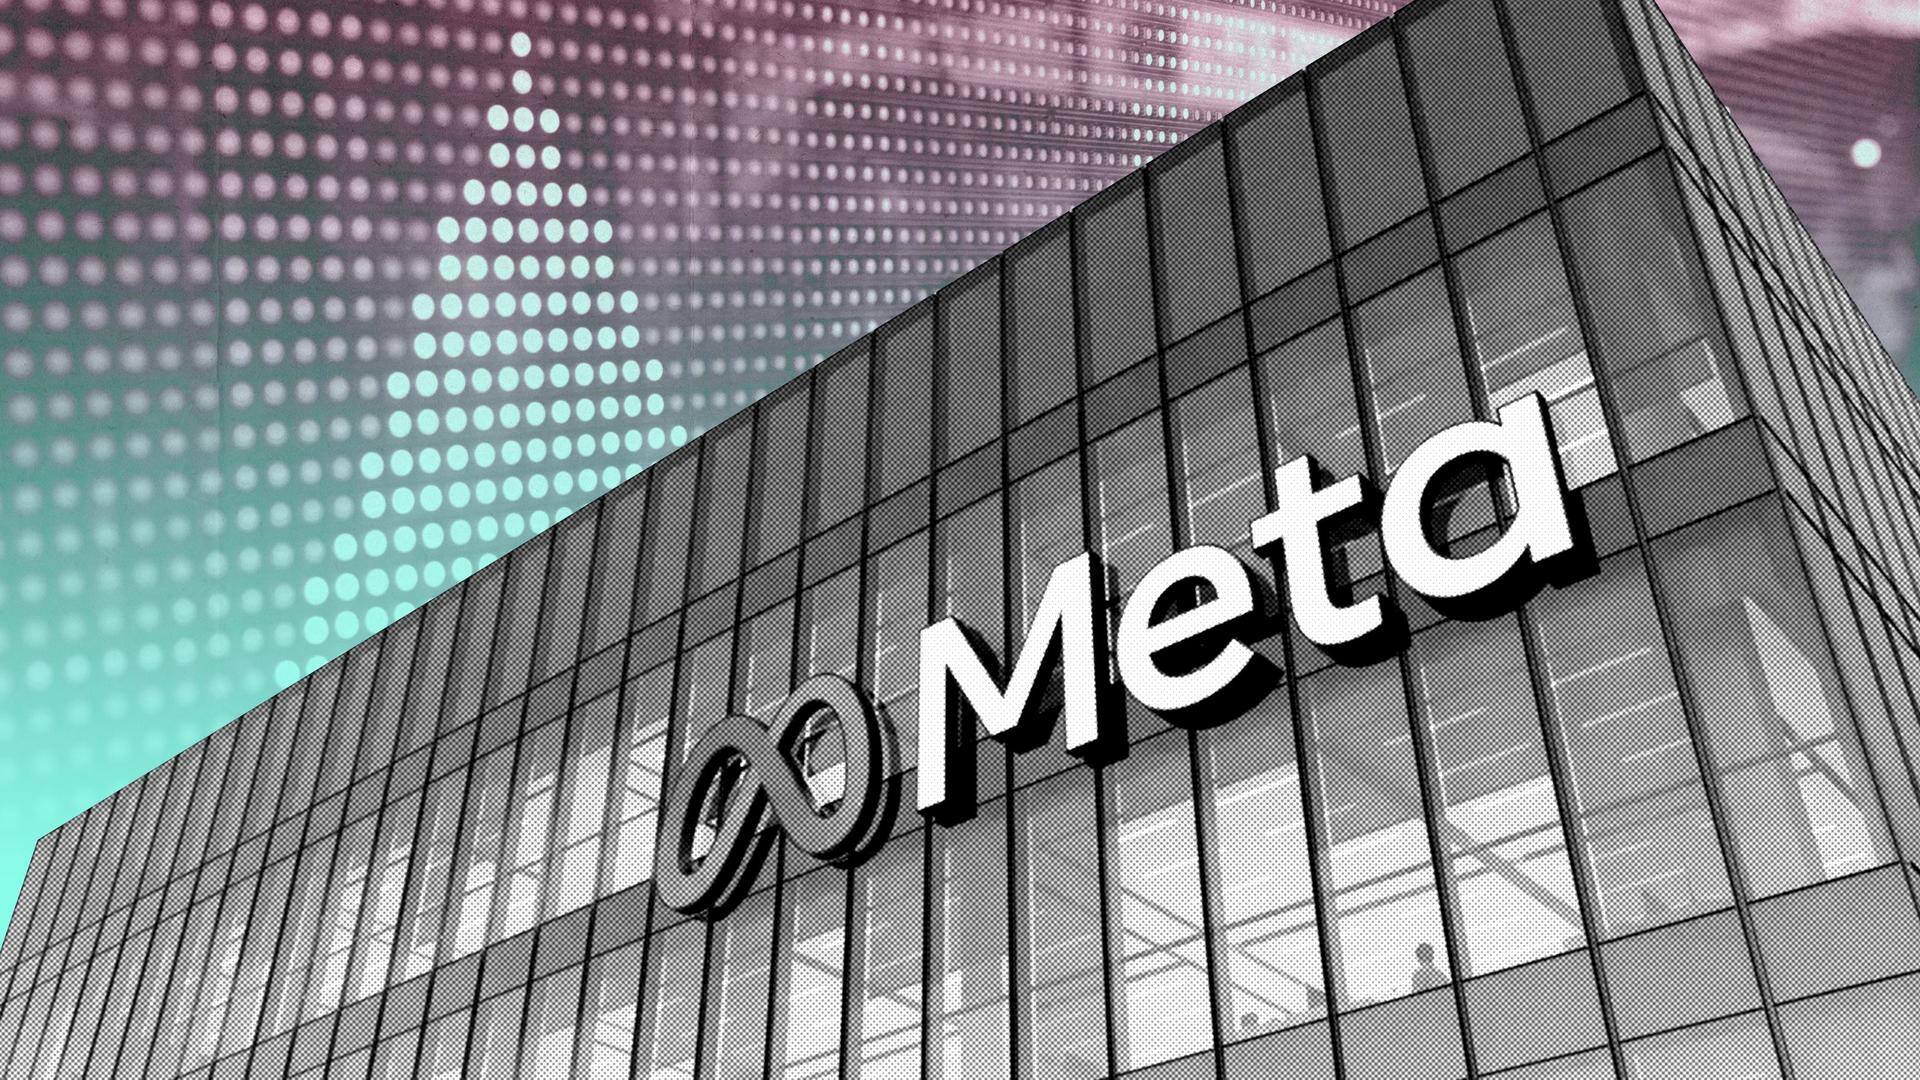 Meta's Q1 earnings aren't too exciting but road ahead is